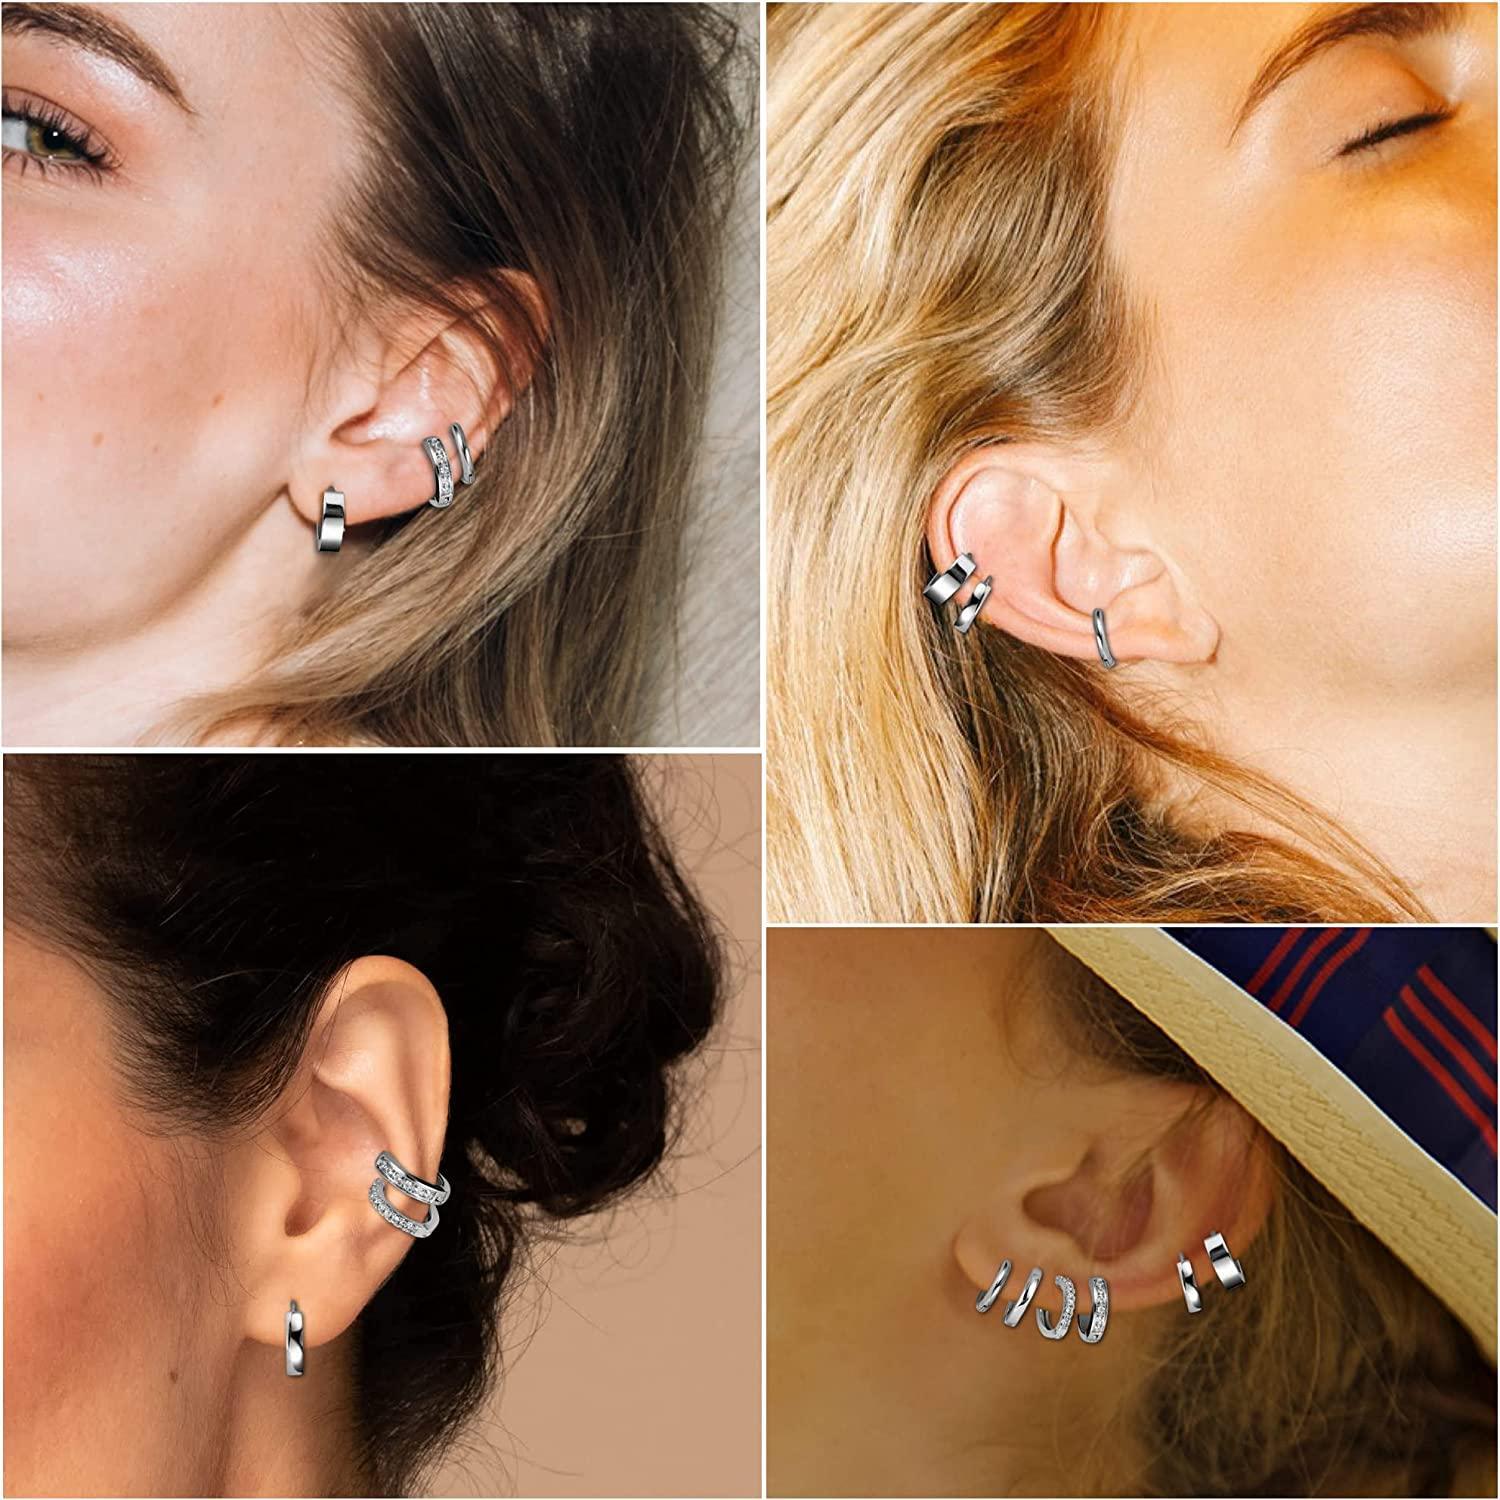 A collection of twelve 6Pairs Huggie Hoop Earrings for Women Men 14K Gold Plated Cubic Zirconia Small Hoop Earrings Tiny Cartilage Helix Daith Earrings Minimalist Ear Piercing Sets in various designs, some plain and others adorned with tiny rhinestones, displayed on a white background.